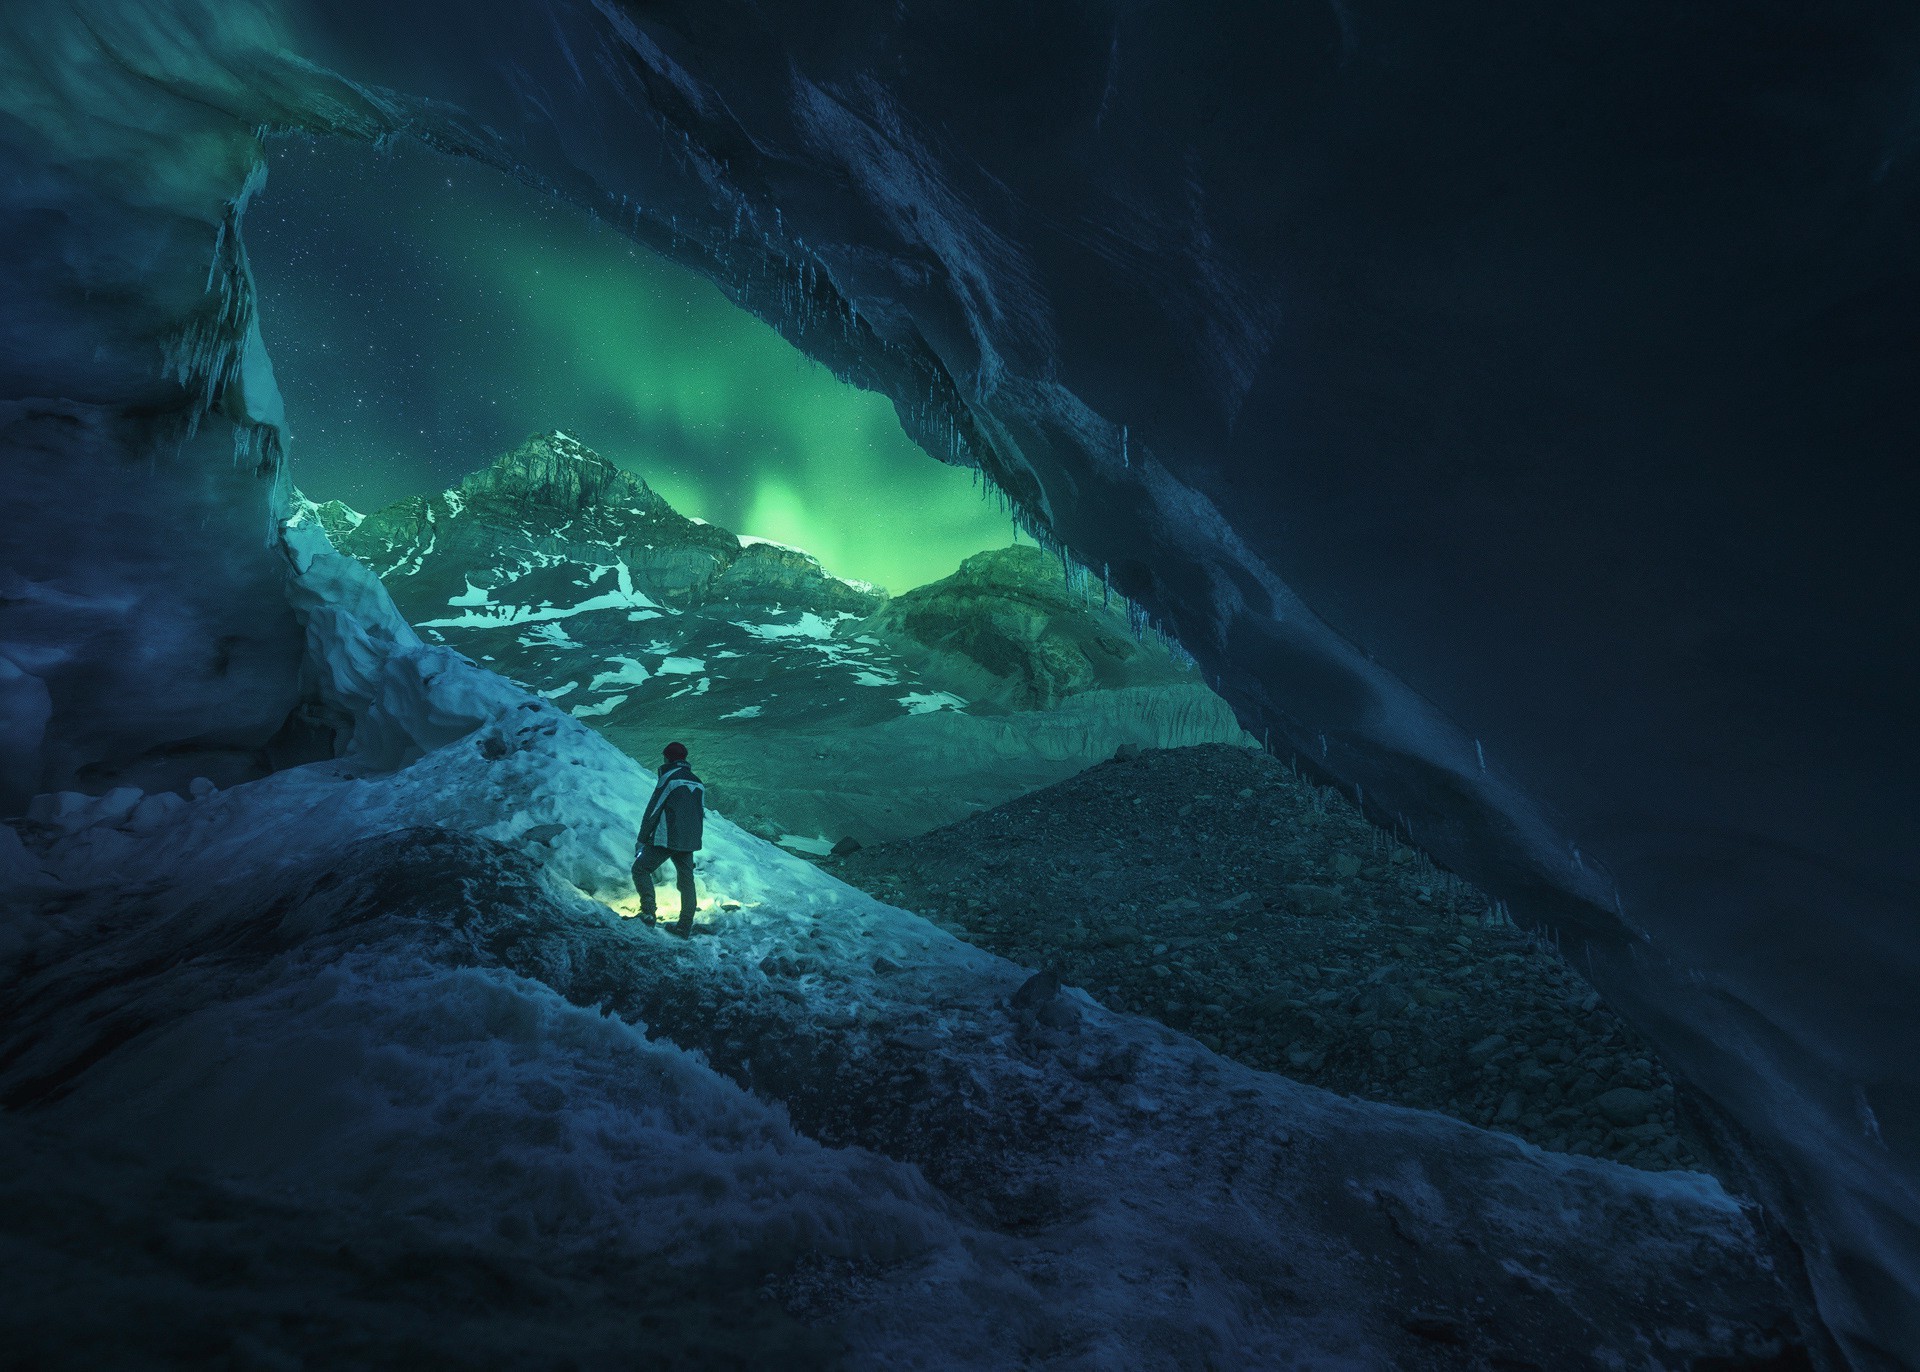 men, Canada, Cave, Ice, Nature, Athabasca, Winter, Night, Blue, Green, Landscape Wallpaper